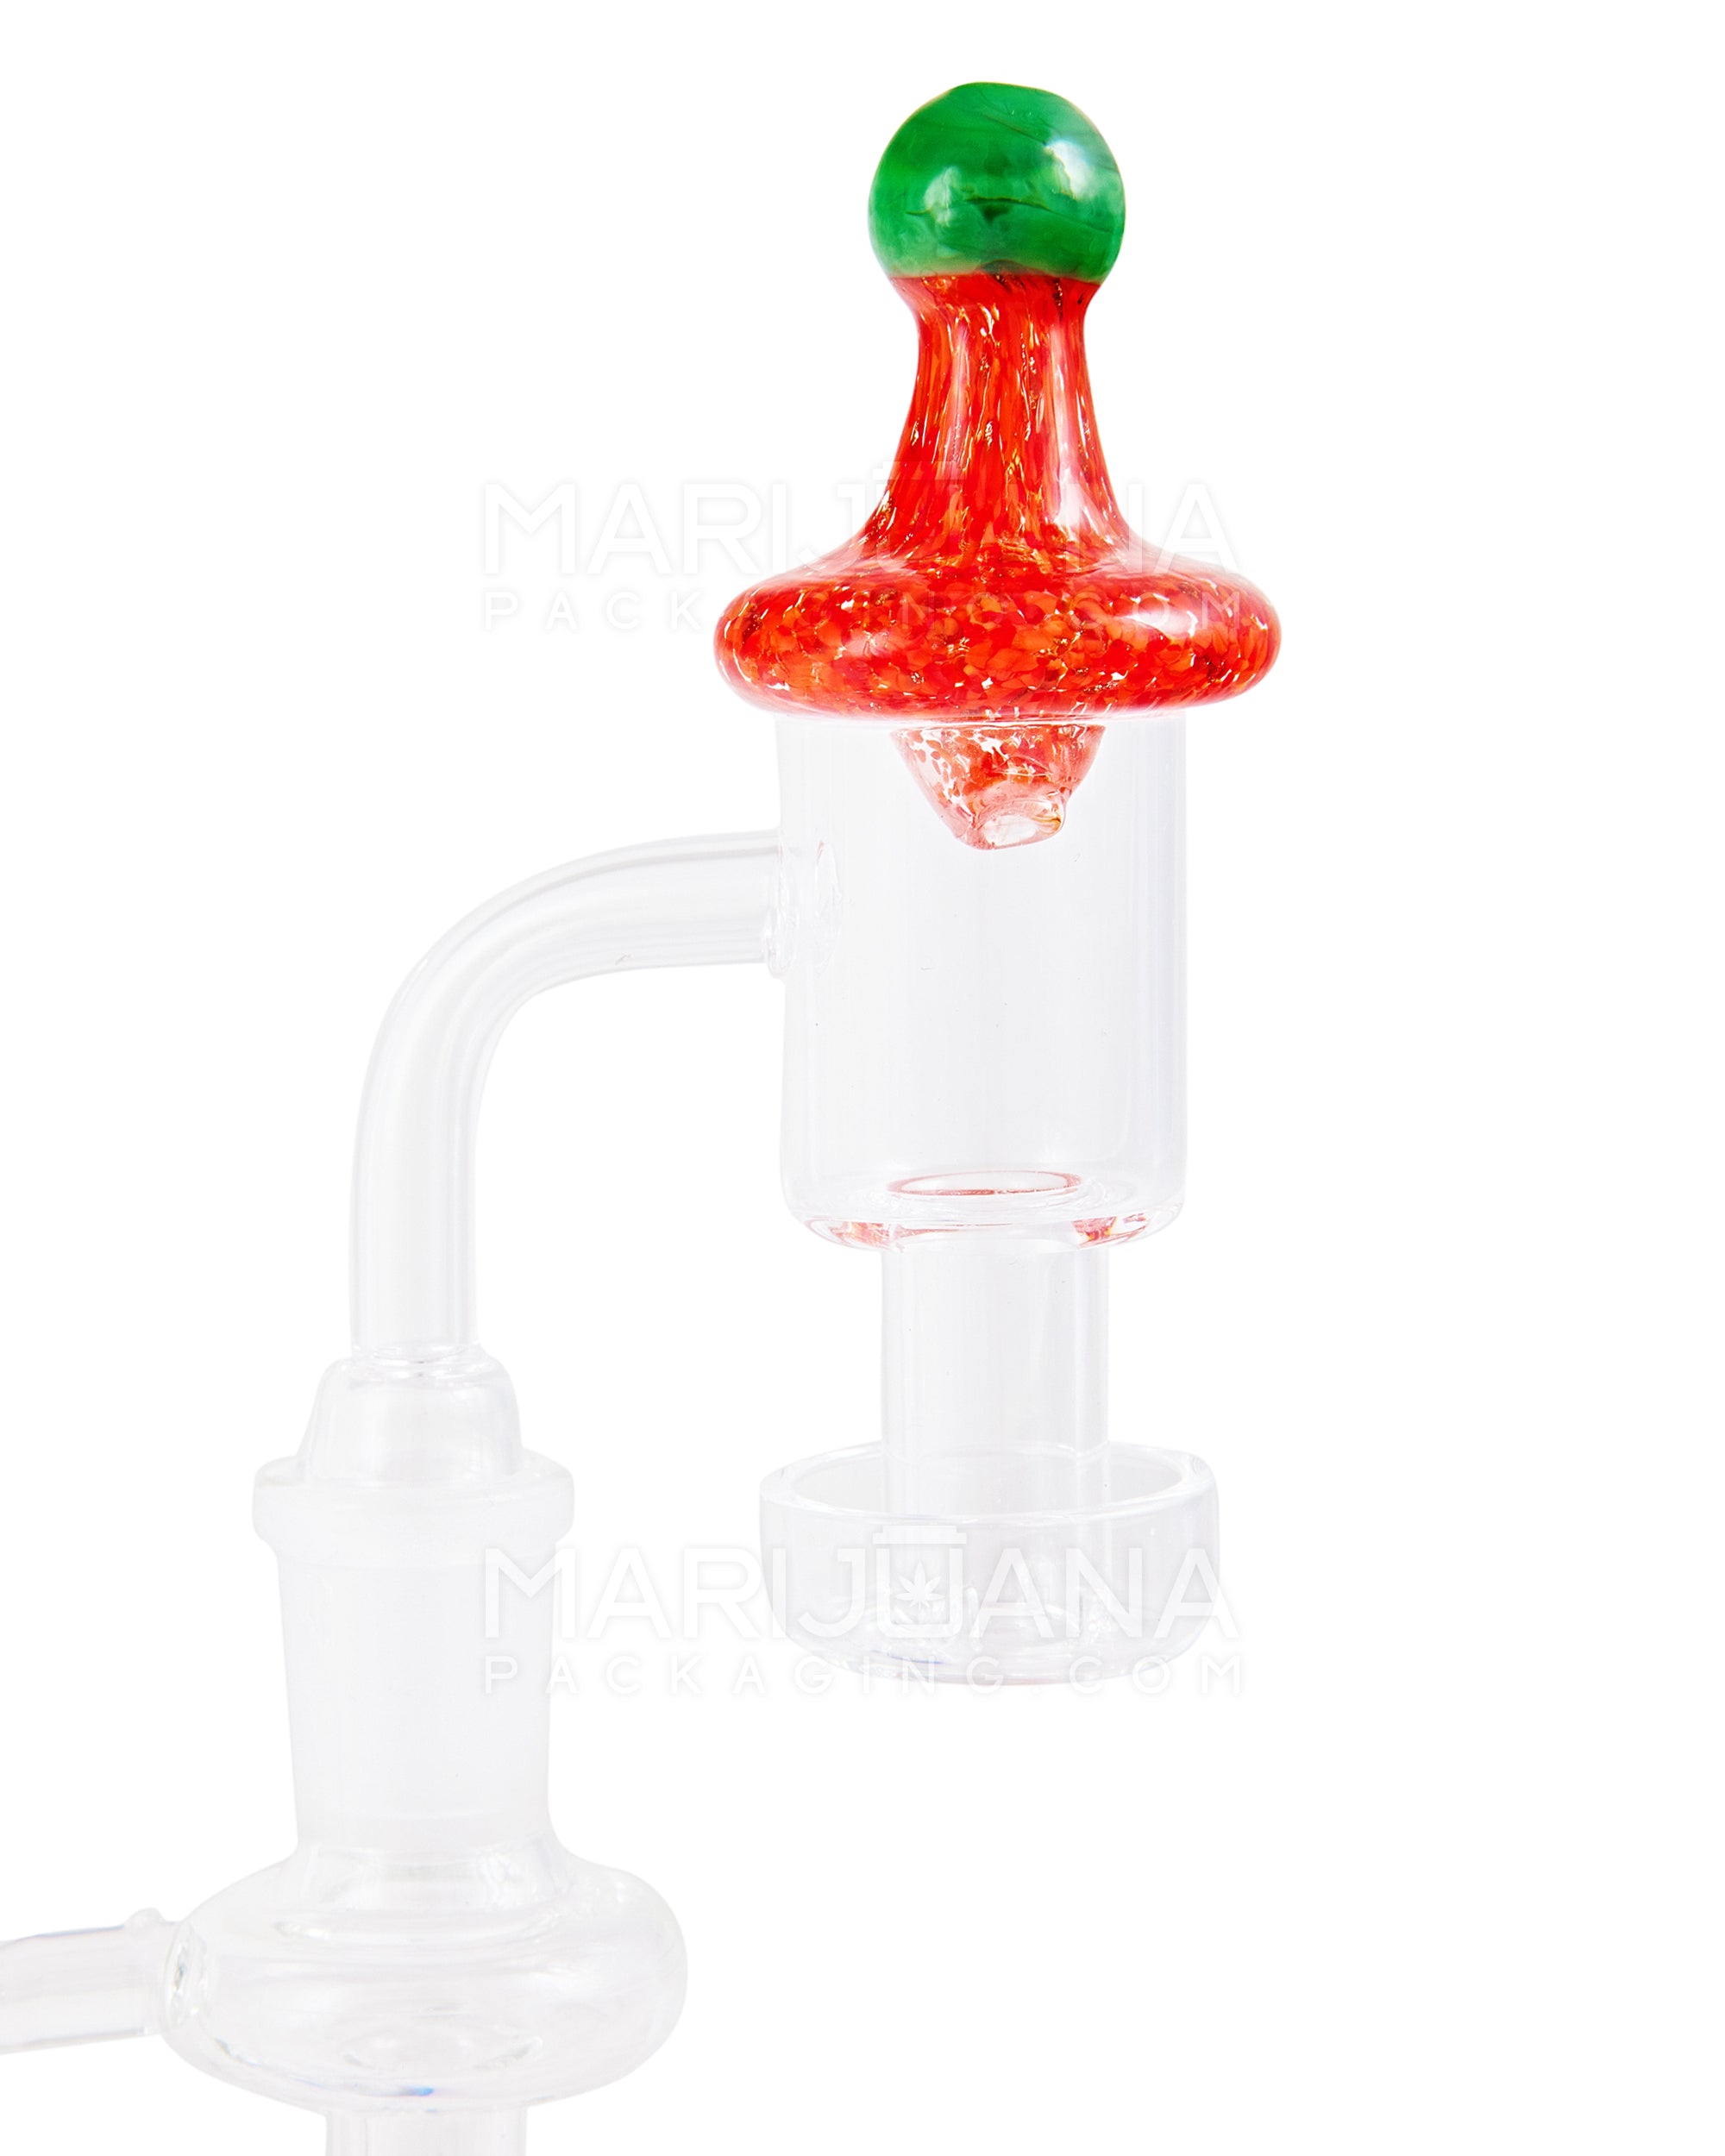 Frit Cone Directional Flow Flat Carb Cap | 30mm - Glass - Assorted - 6